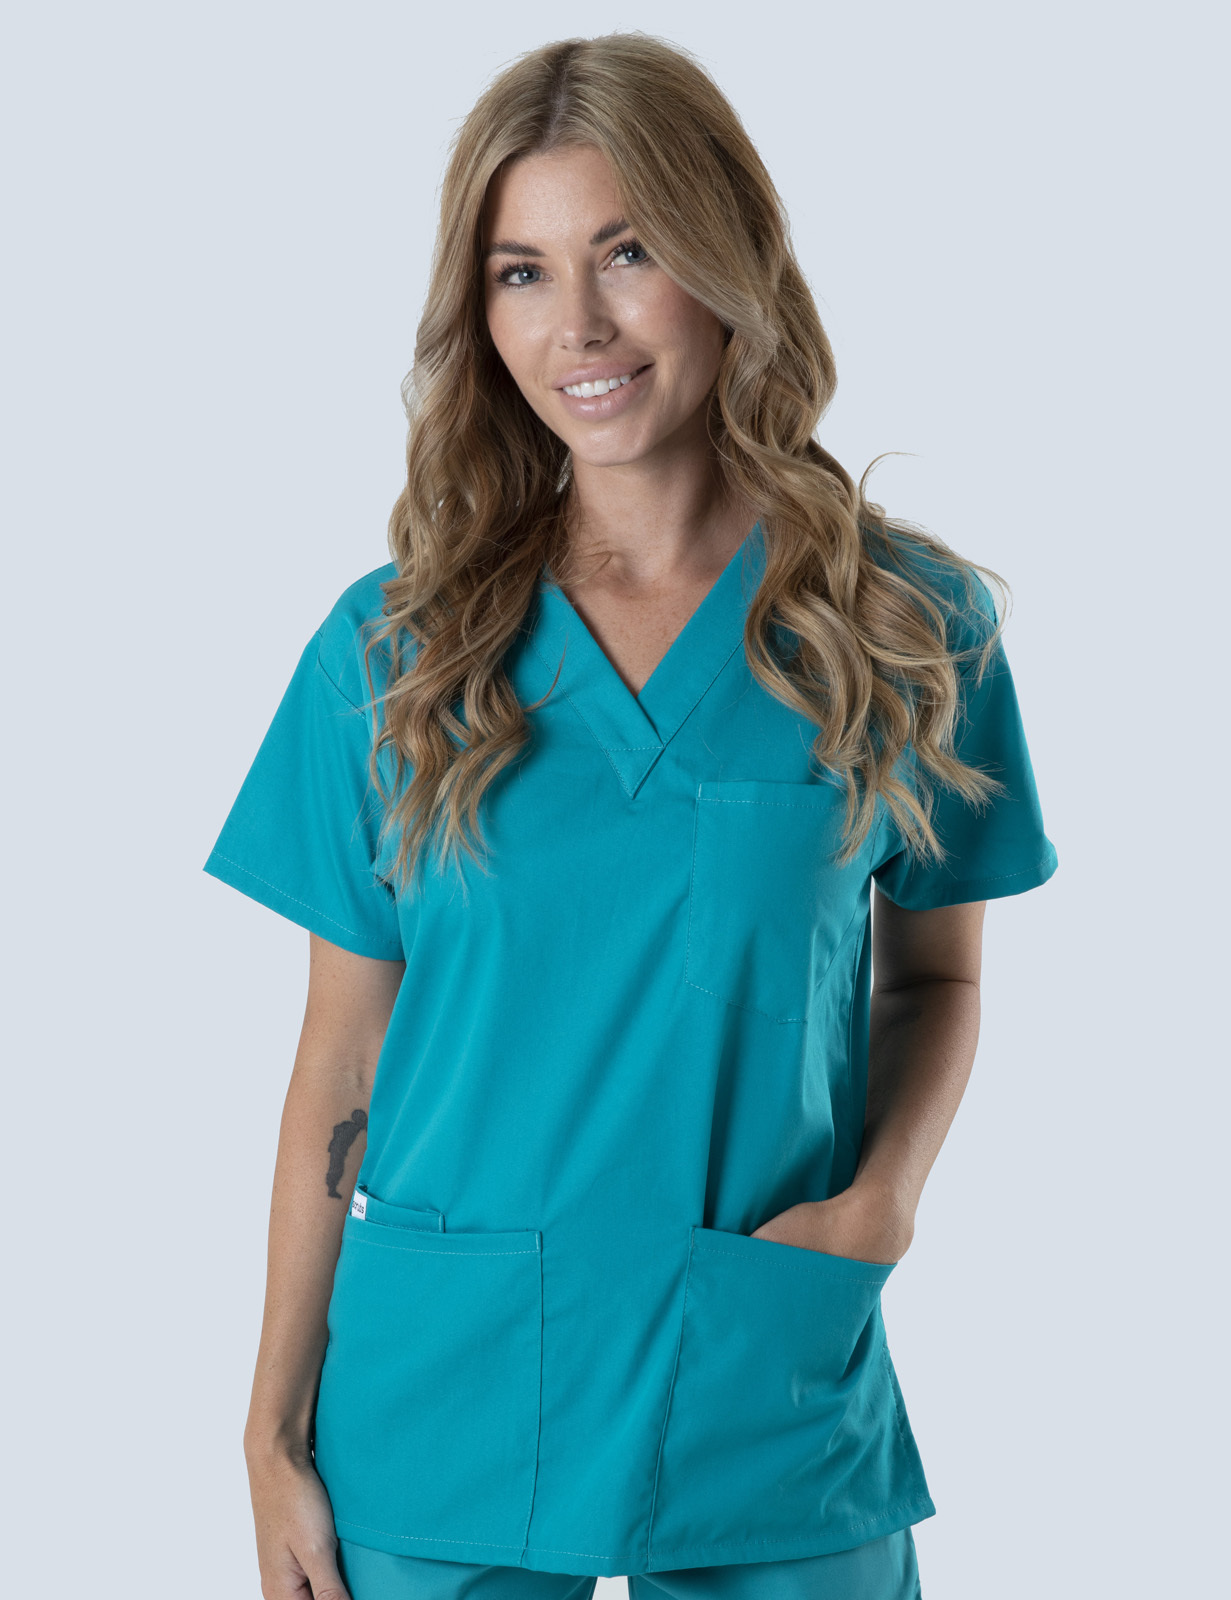 Gold Coast University Hospital - Intensive Care Unit (4 Pocket Scrub Top and Cargo Pants in Teal incl Logos)